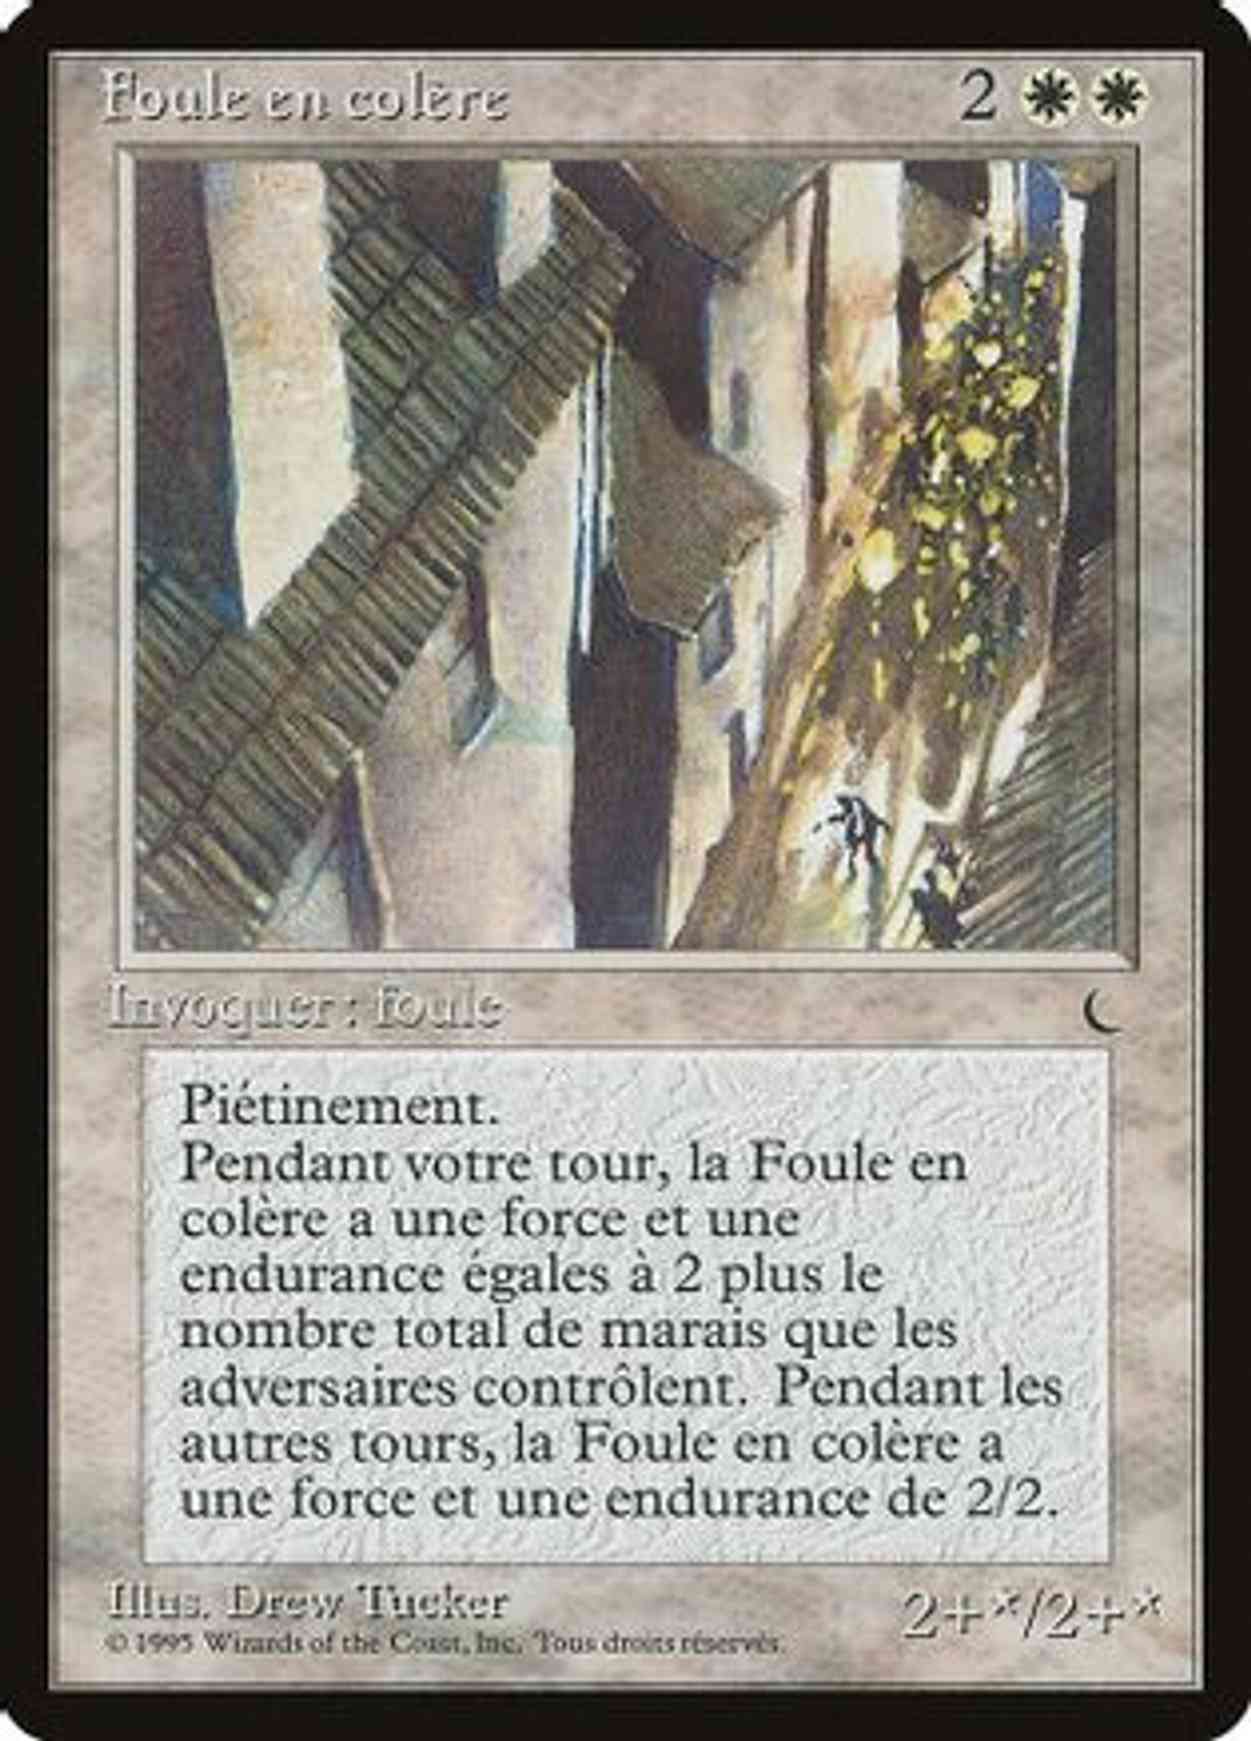 Angry Mob (French) - "Foule en colere" magic card front